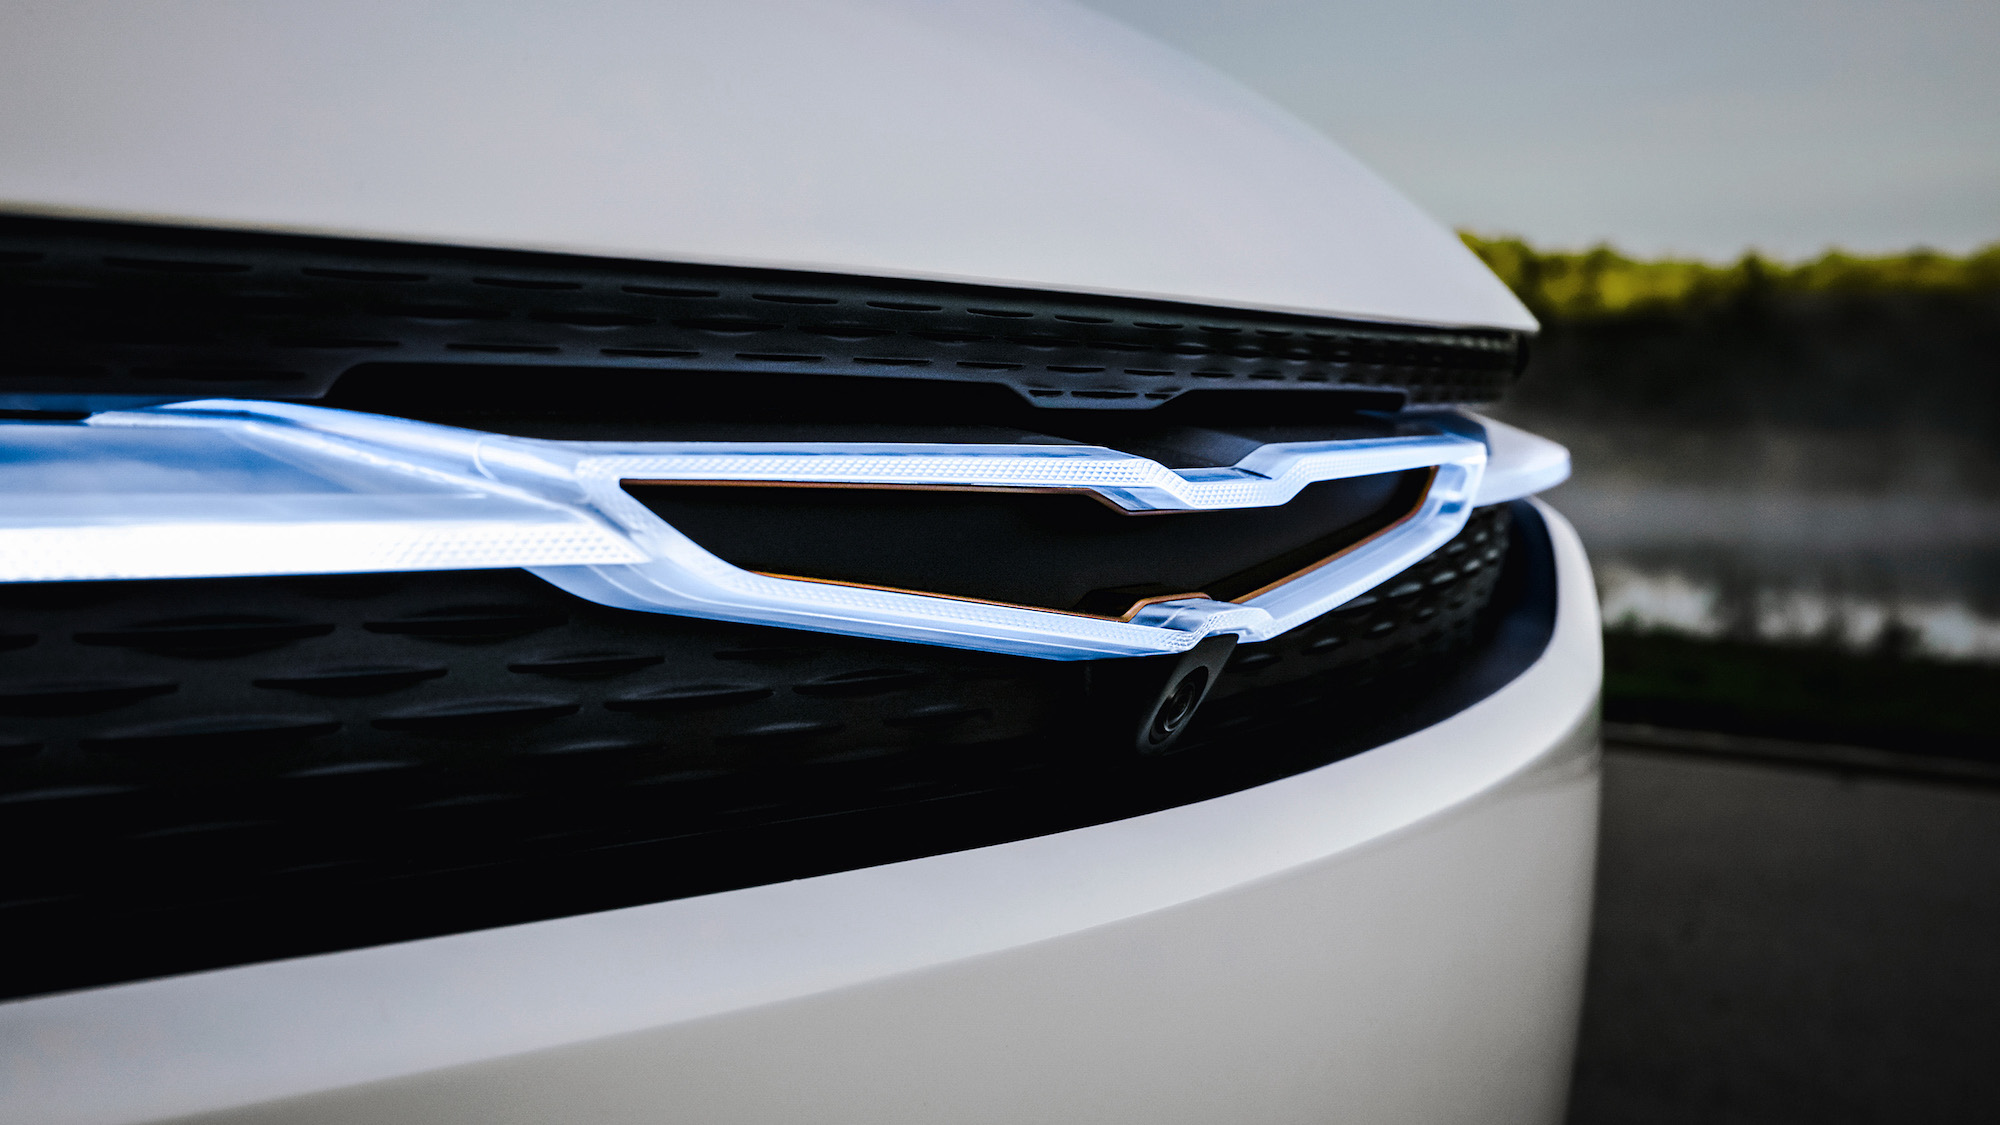 Chrysler Airflow Concept announces its electric aesthetic with the Chrysler Wing logo attached to a transverse grille/bright blade illuminated by crystal LED lighting.